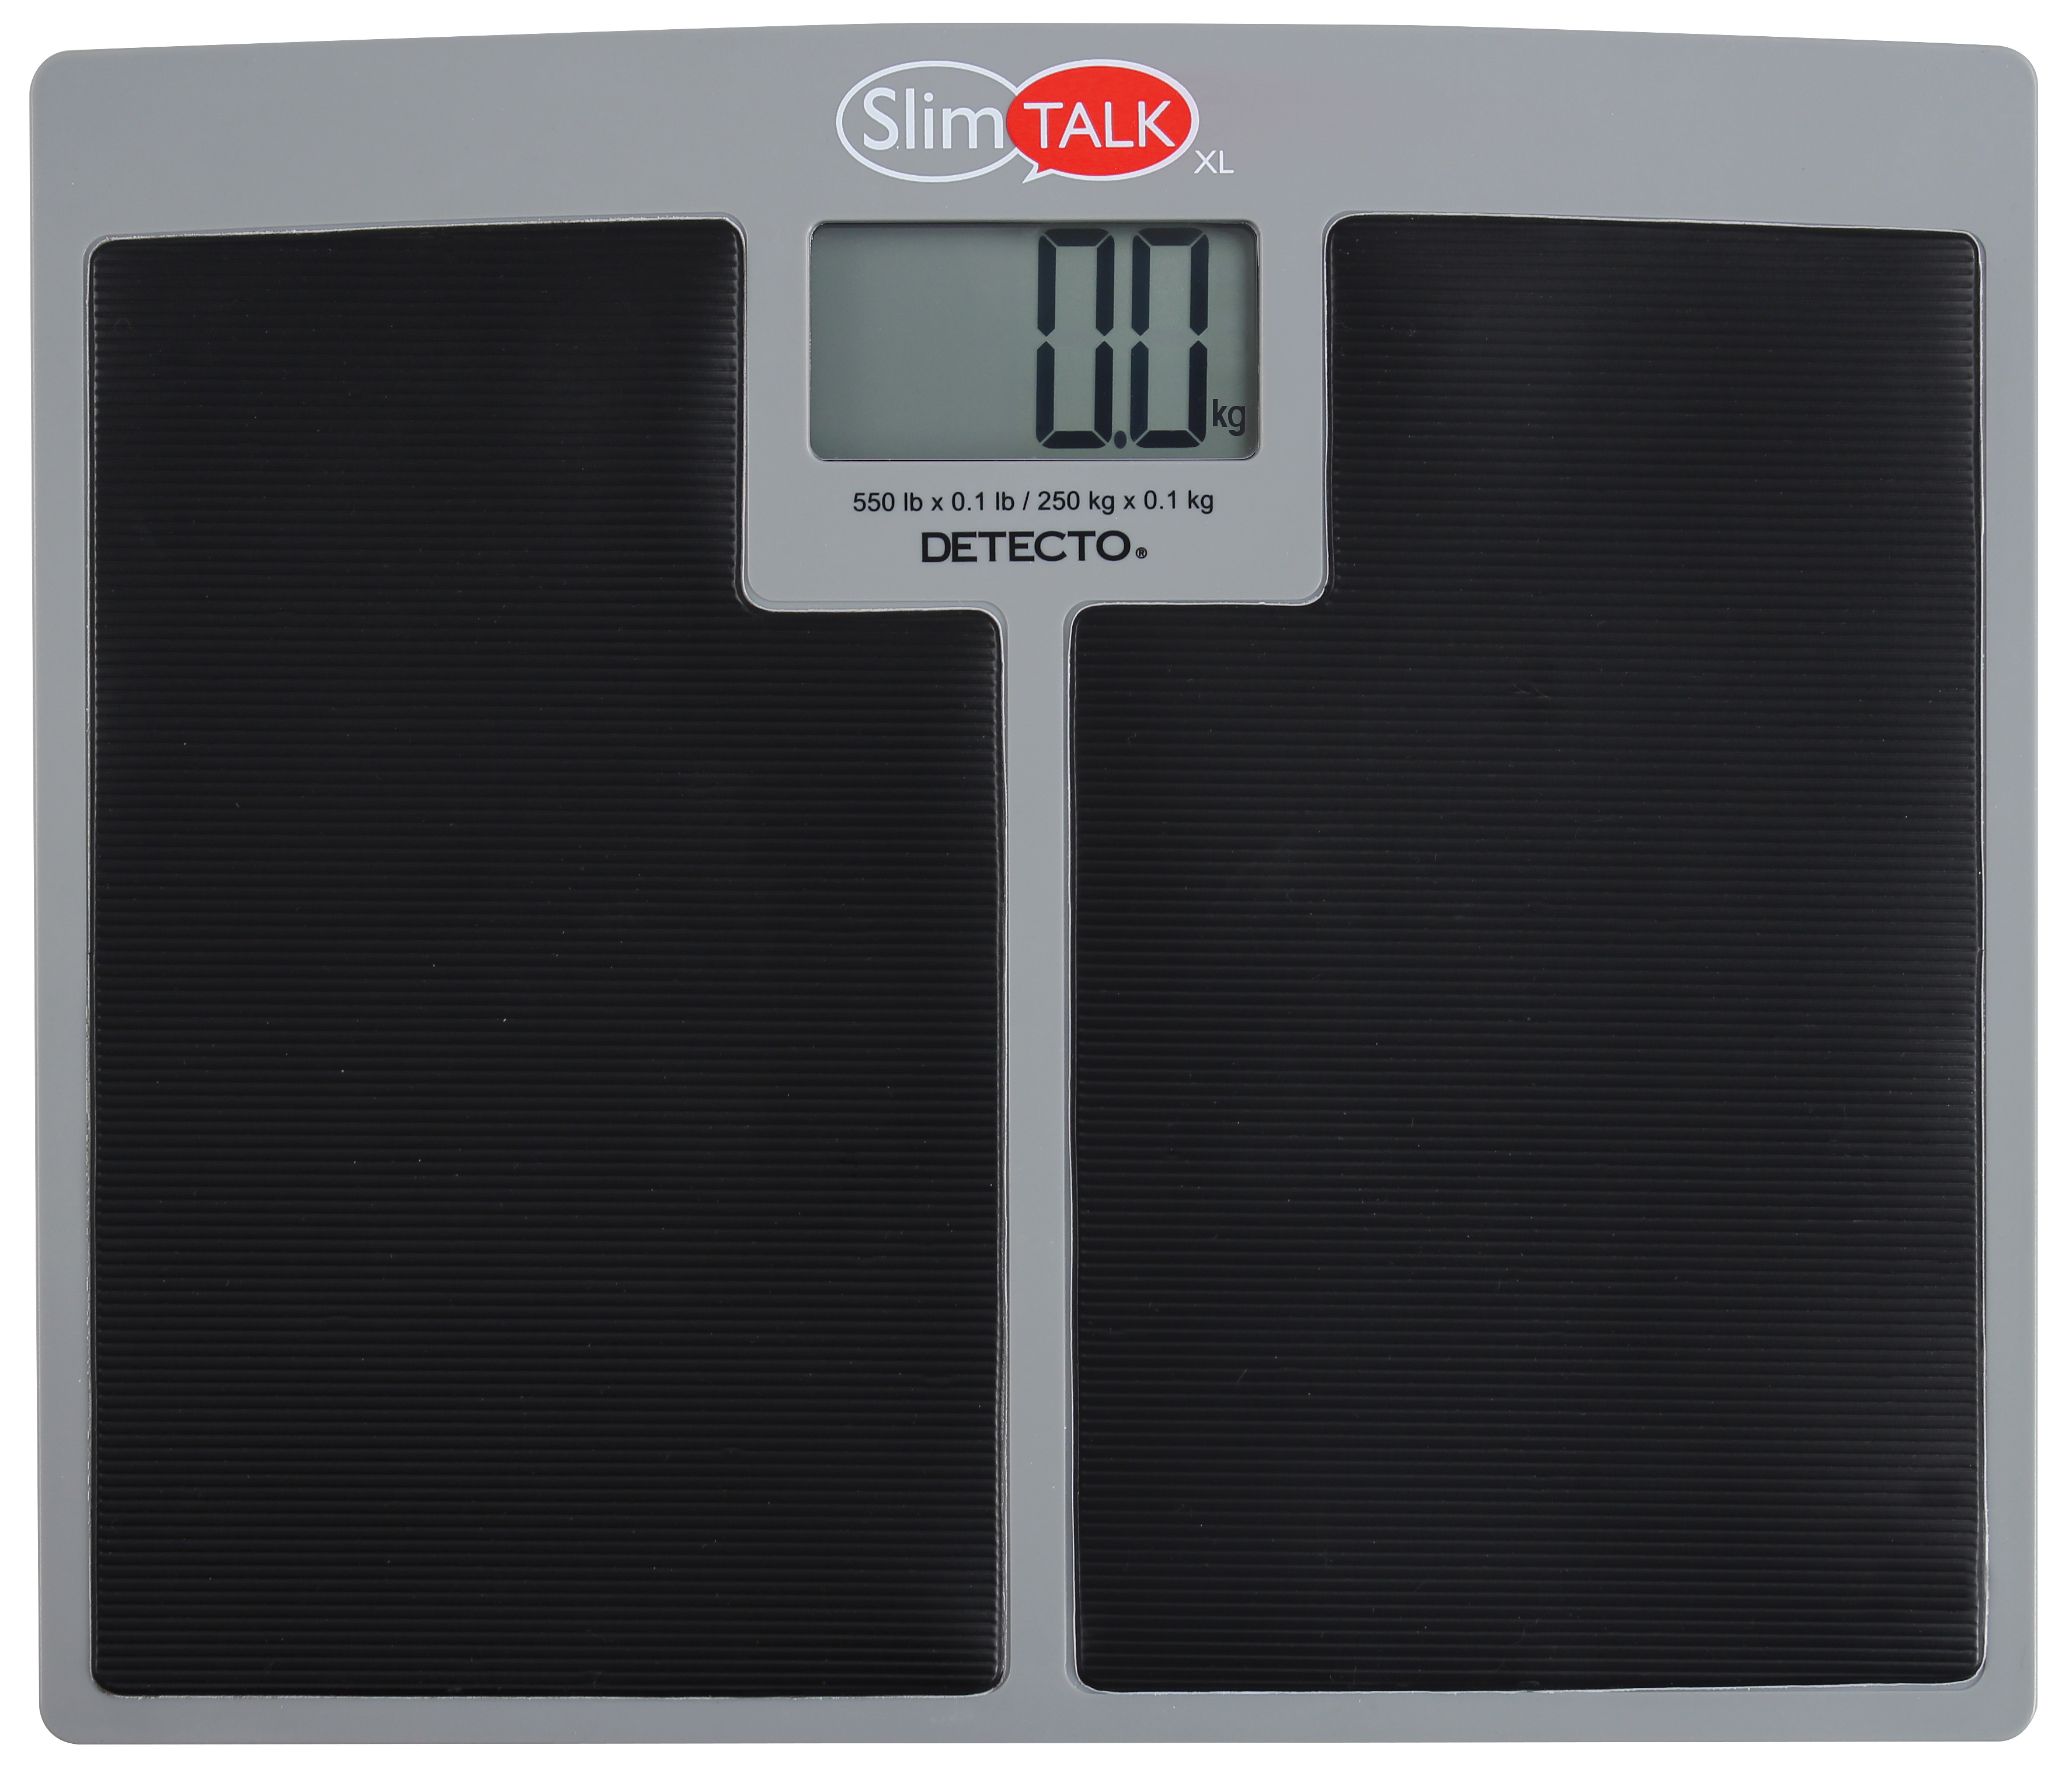 Talking Bathroom Scale Weight Capacity 396 lb. Diabetics, The Blind, Low  Vision